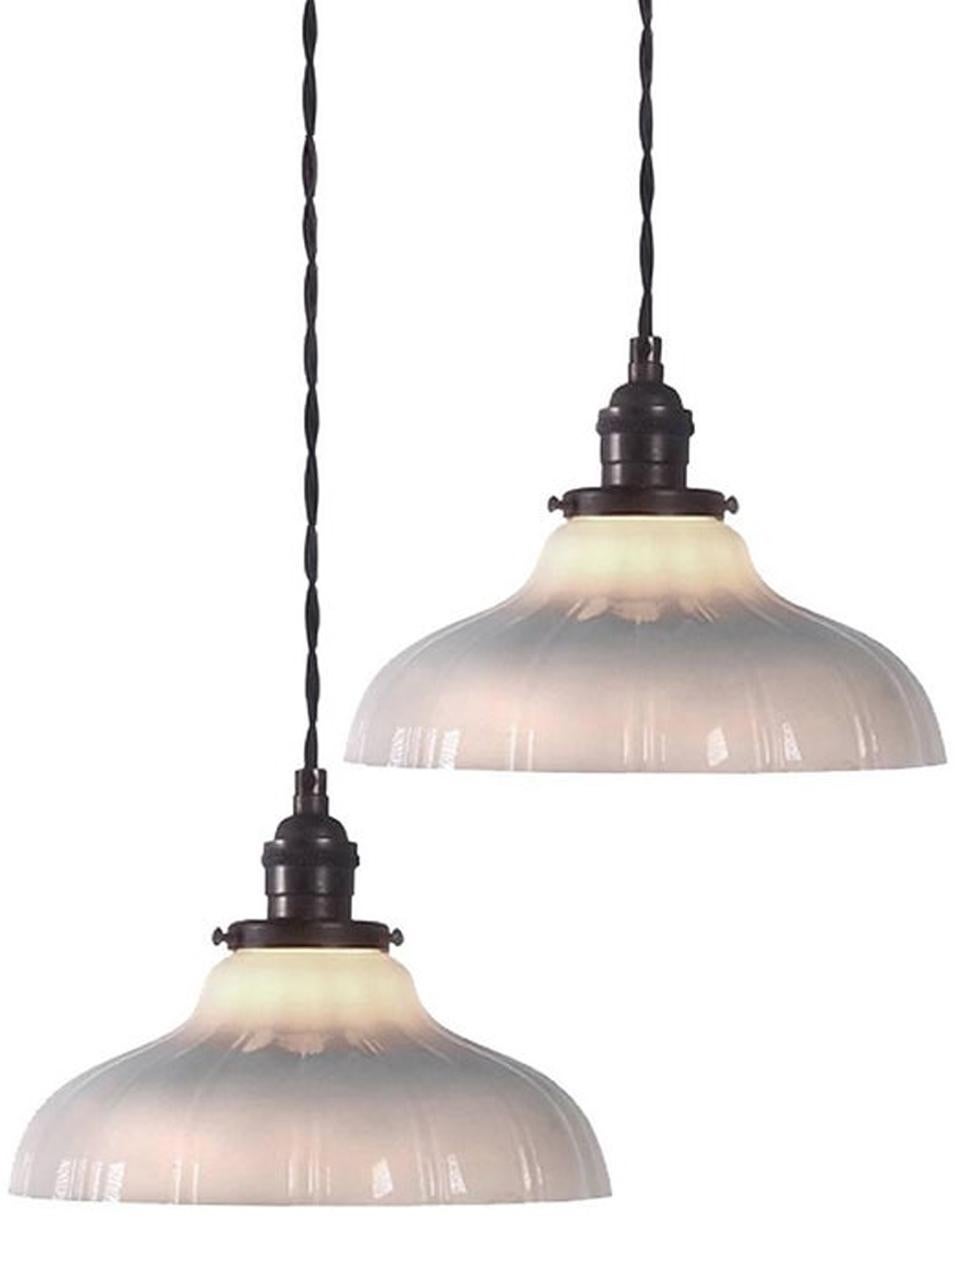 Softly curved bell shaped pendants are a Classic. They feel at home with any style decor. This example has a thick-thin pattern milk glass with a straight edge. The lamps are per lamp. This way you can buy just one or the collection. Measures: 9